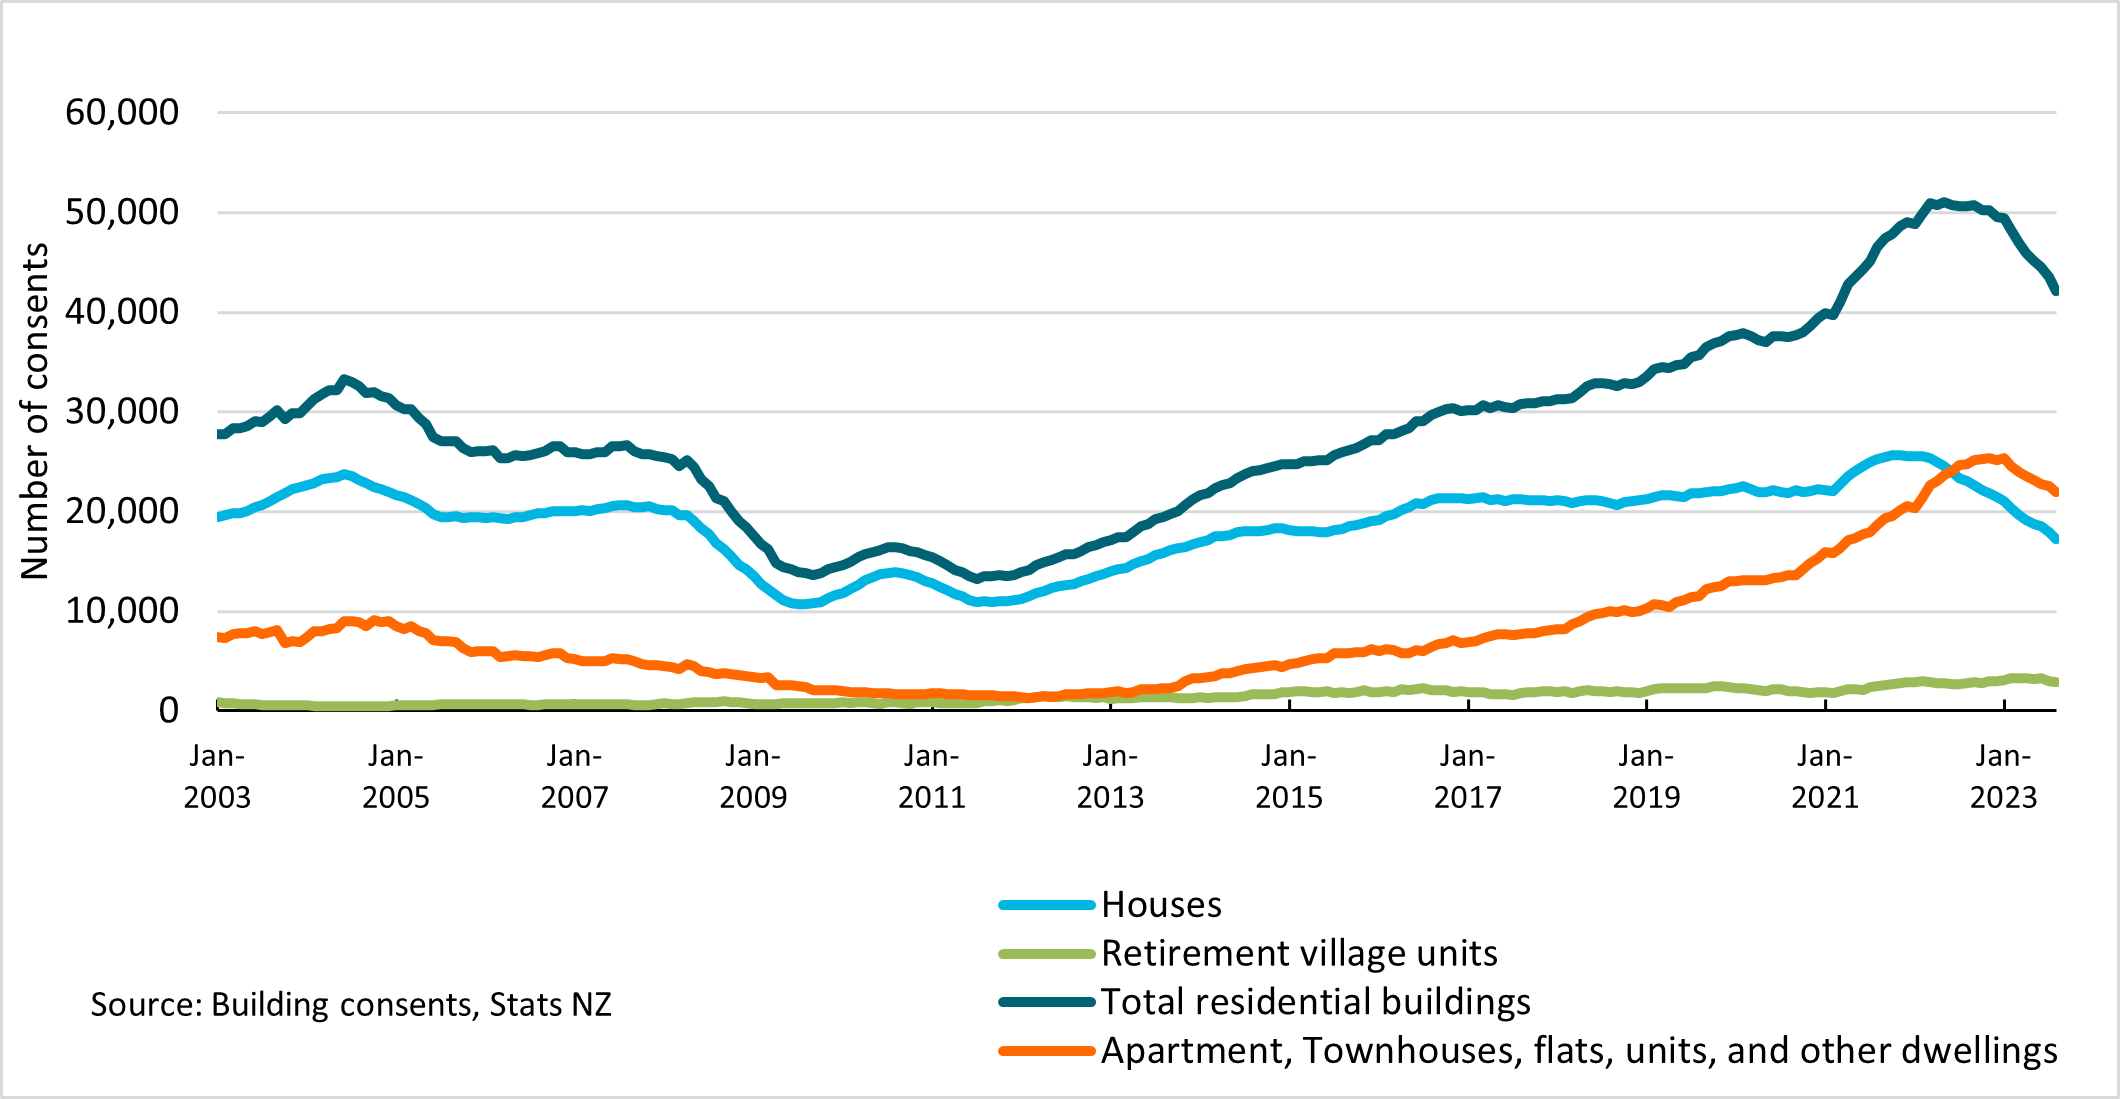 Figure 10: New residential dwellings consented. Depicts the number of new home consents over time, reflecting trends in residential construction activity.